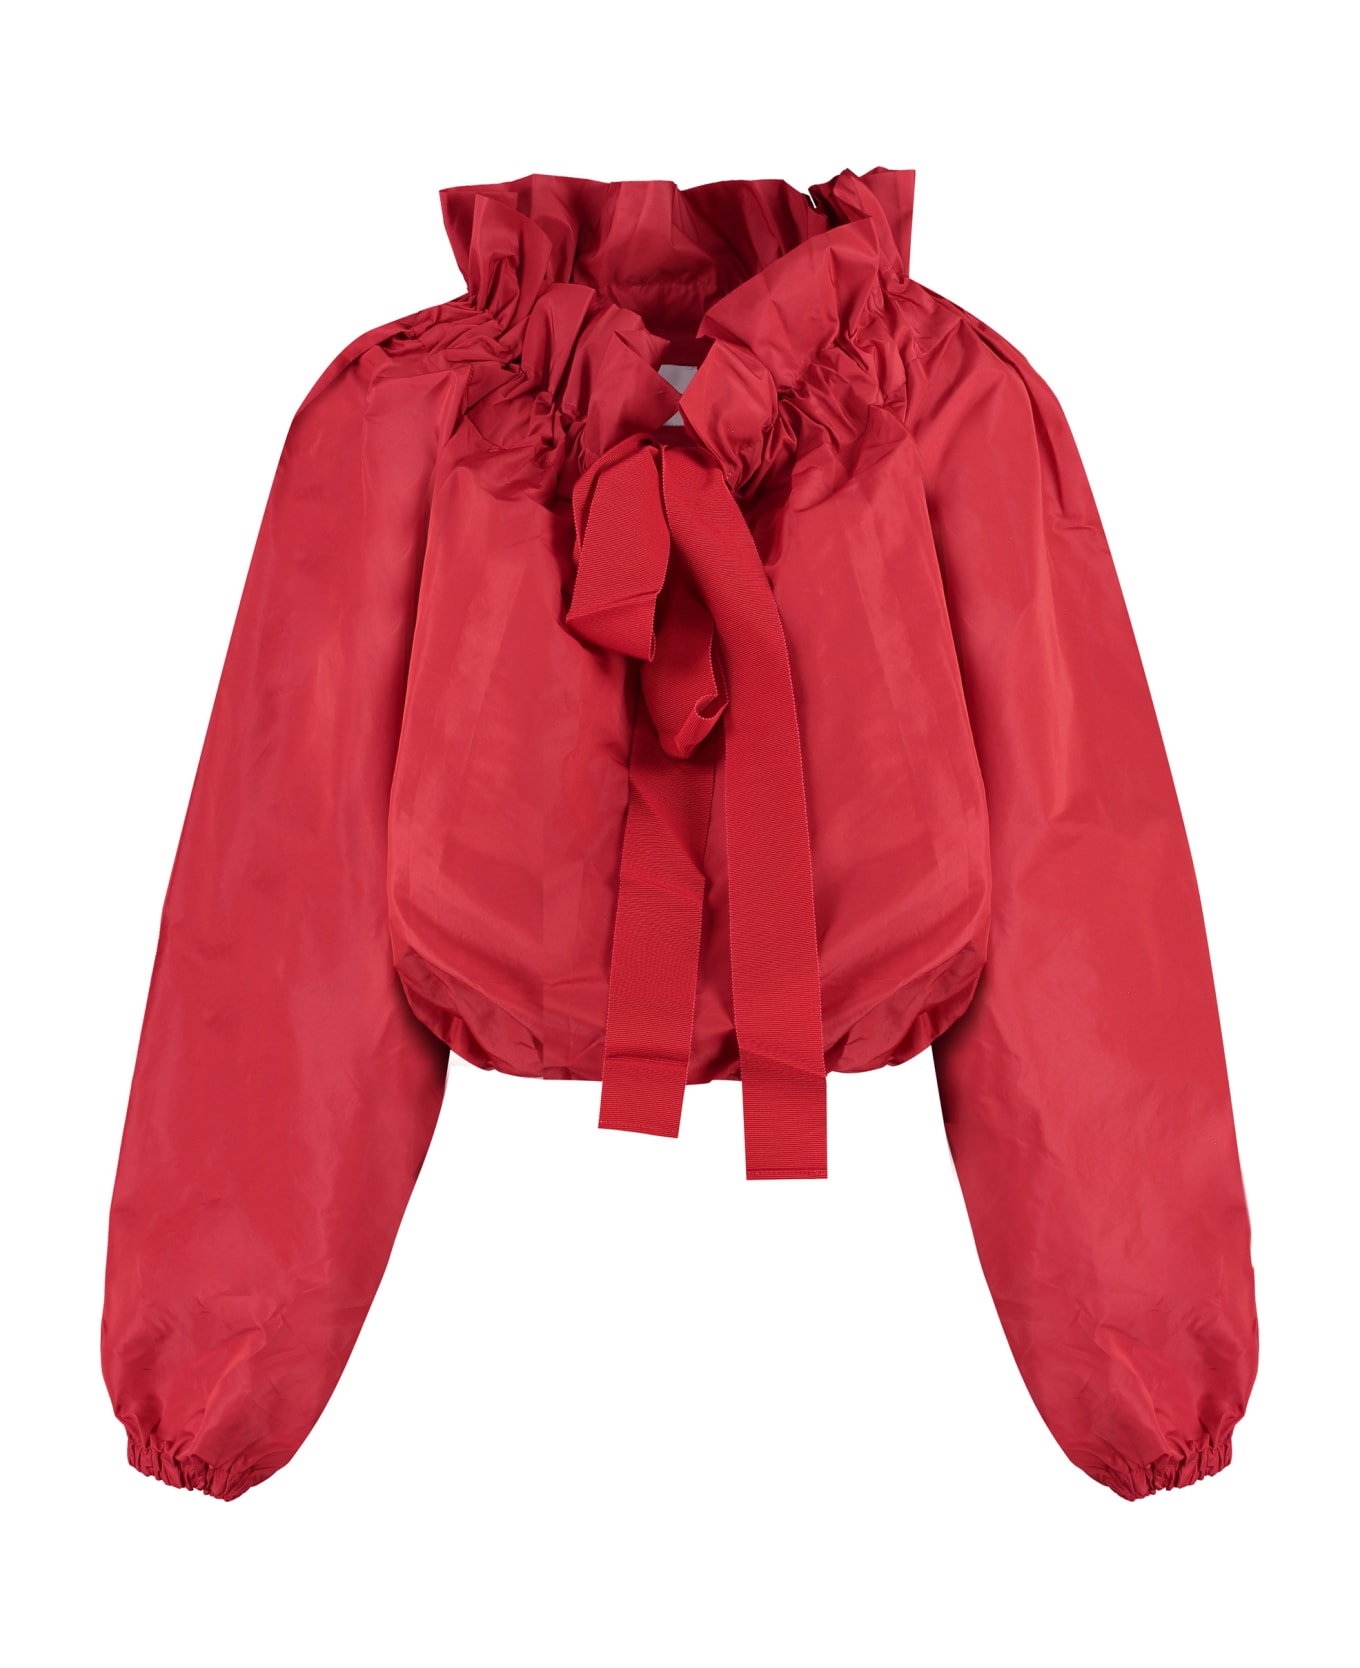 Patou Ruffled Cotton Blouse - red